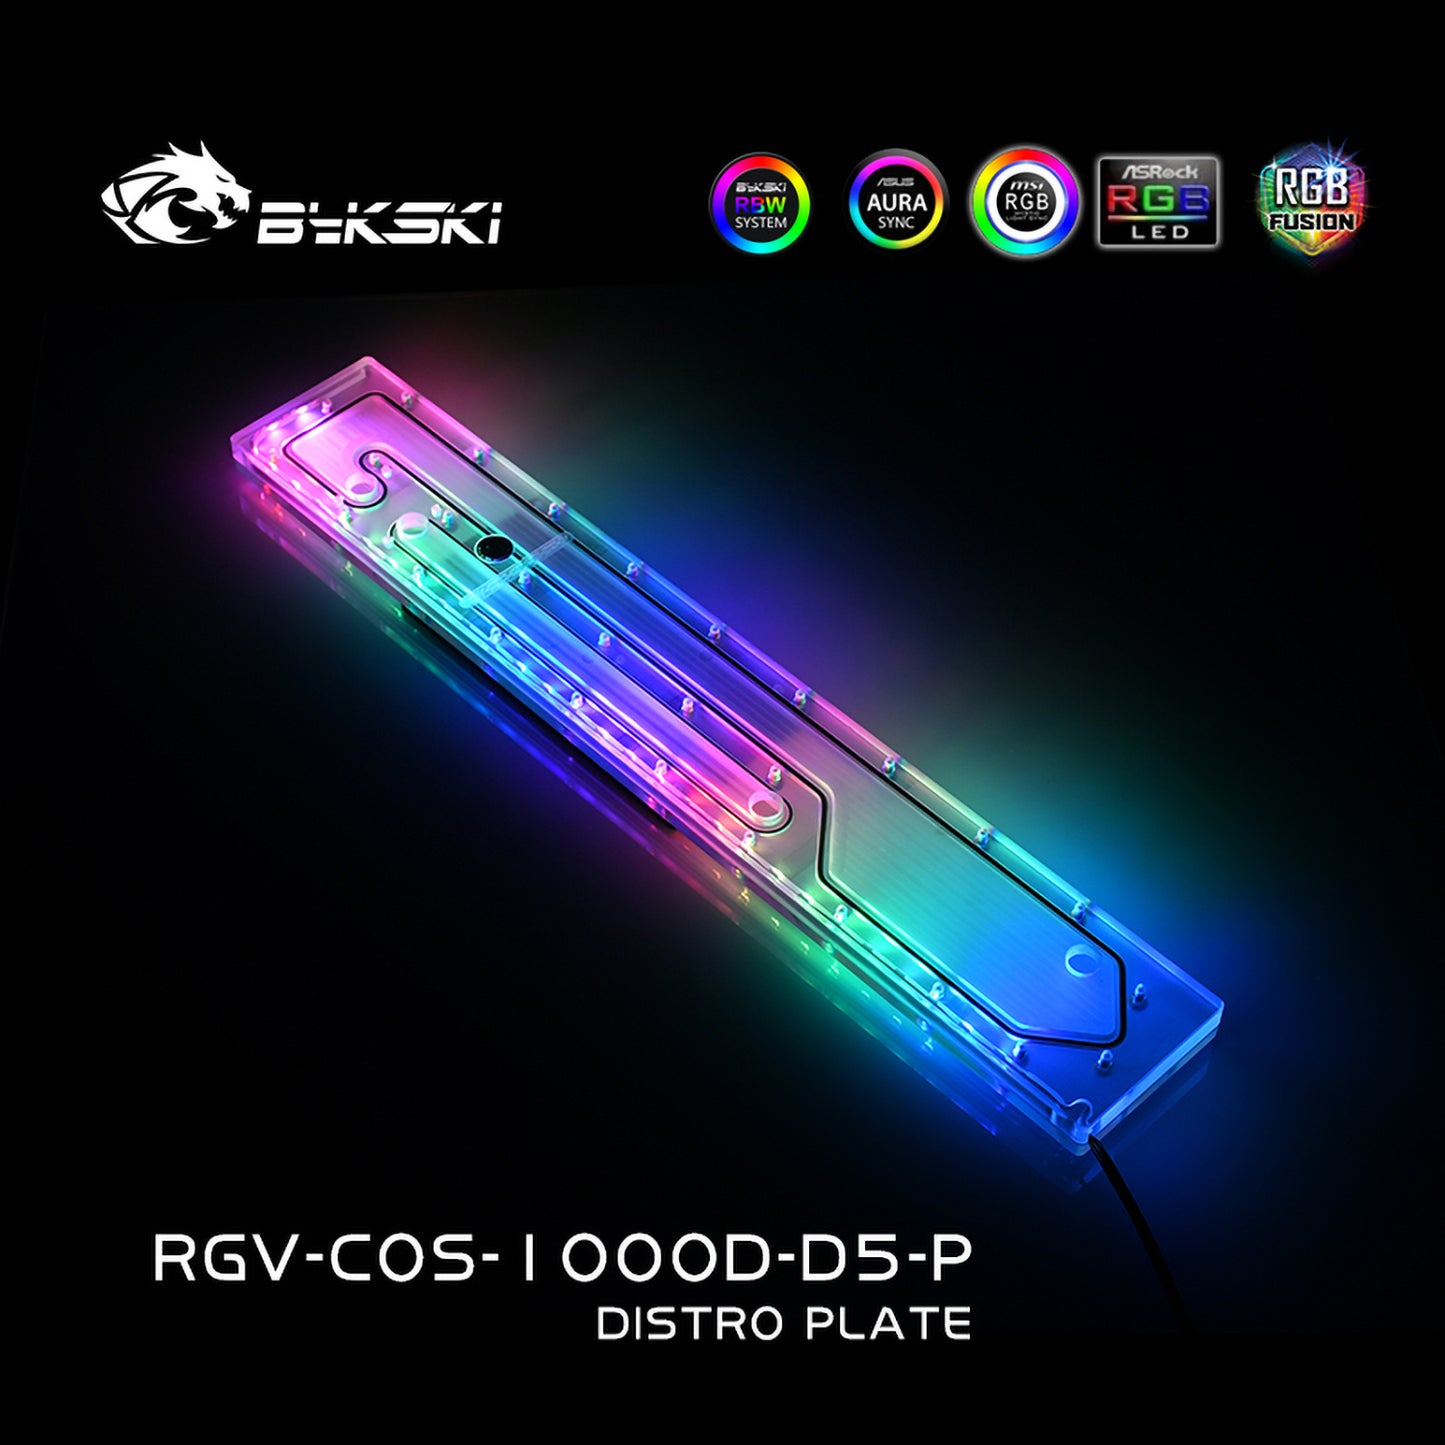 Bykski Distro Plate Kit For Corsair 1000D Case, 5V A-RGB Complete Loop For Single GPU PC Building, Water Cooling Waterway Board, RGV-COS-1000D-D5-P